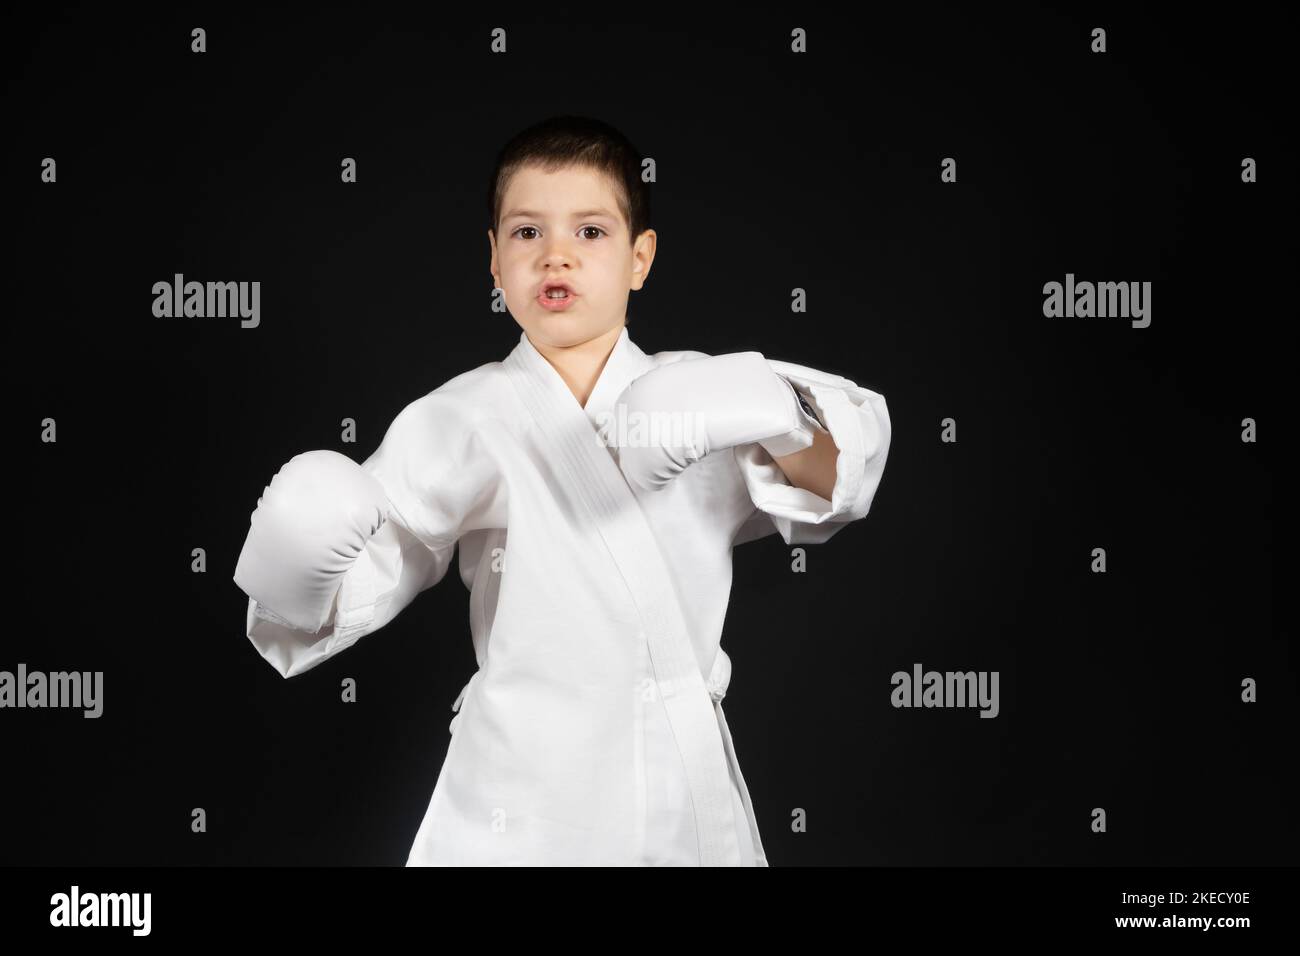 A little boy learns martial arts, doing karate in kimono and boxing gloves hand pads. Stock Photo